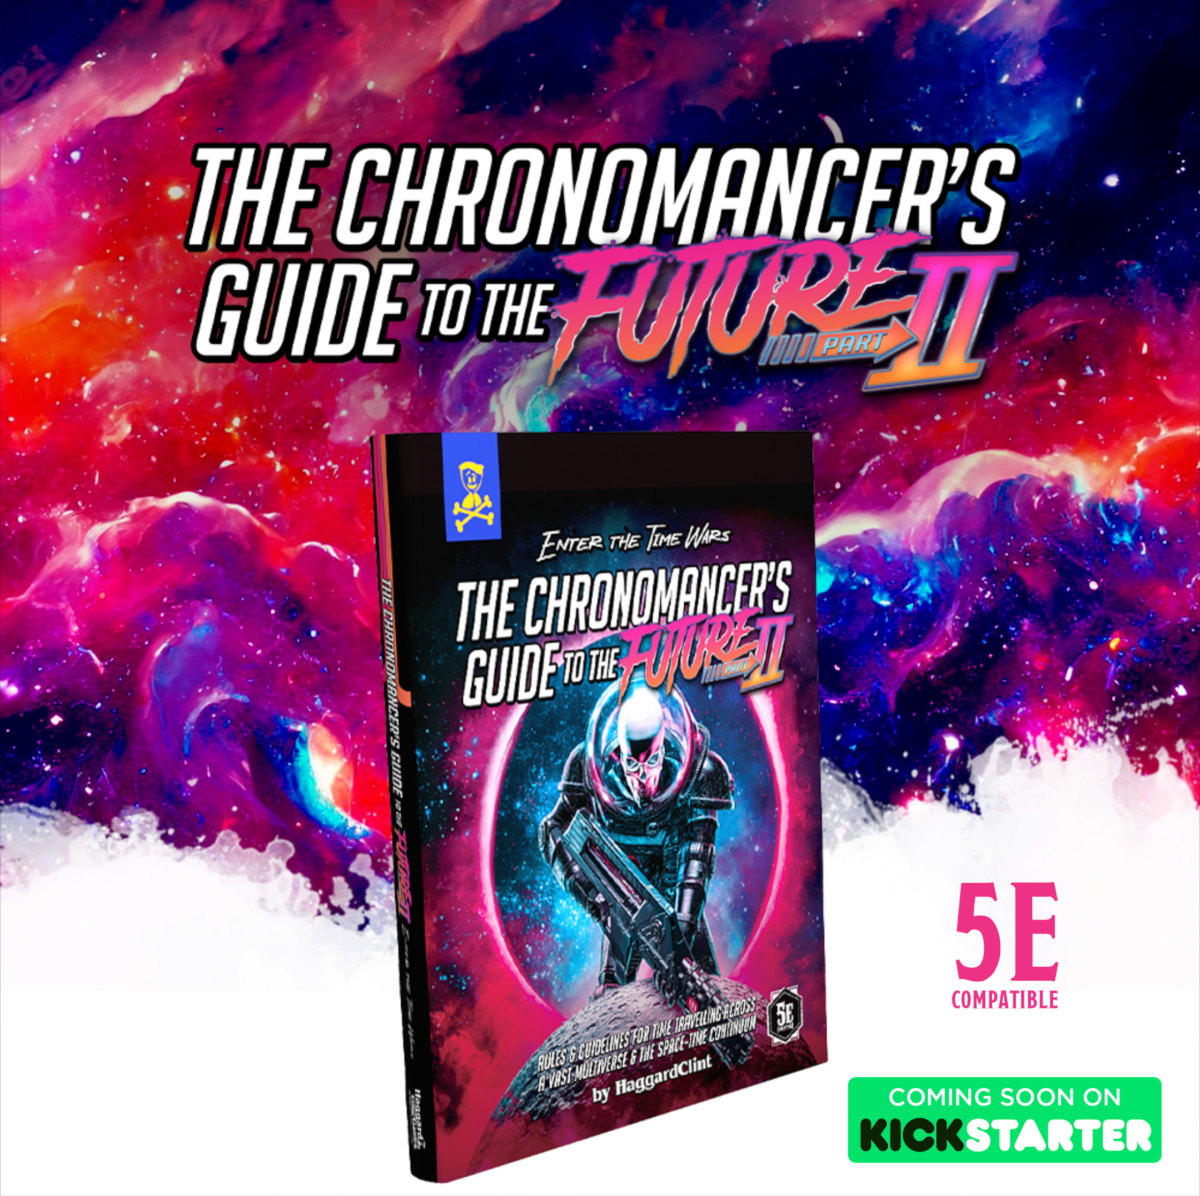 Nebula-like pink & purple clouds + book, lettering similar to Back to the Future: The Chronomancer's Guide To The Future Part 2, 5E Compatible, By HaggardClint Coming Soon On Kickstarter